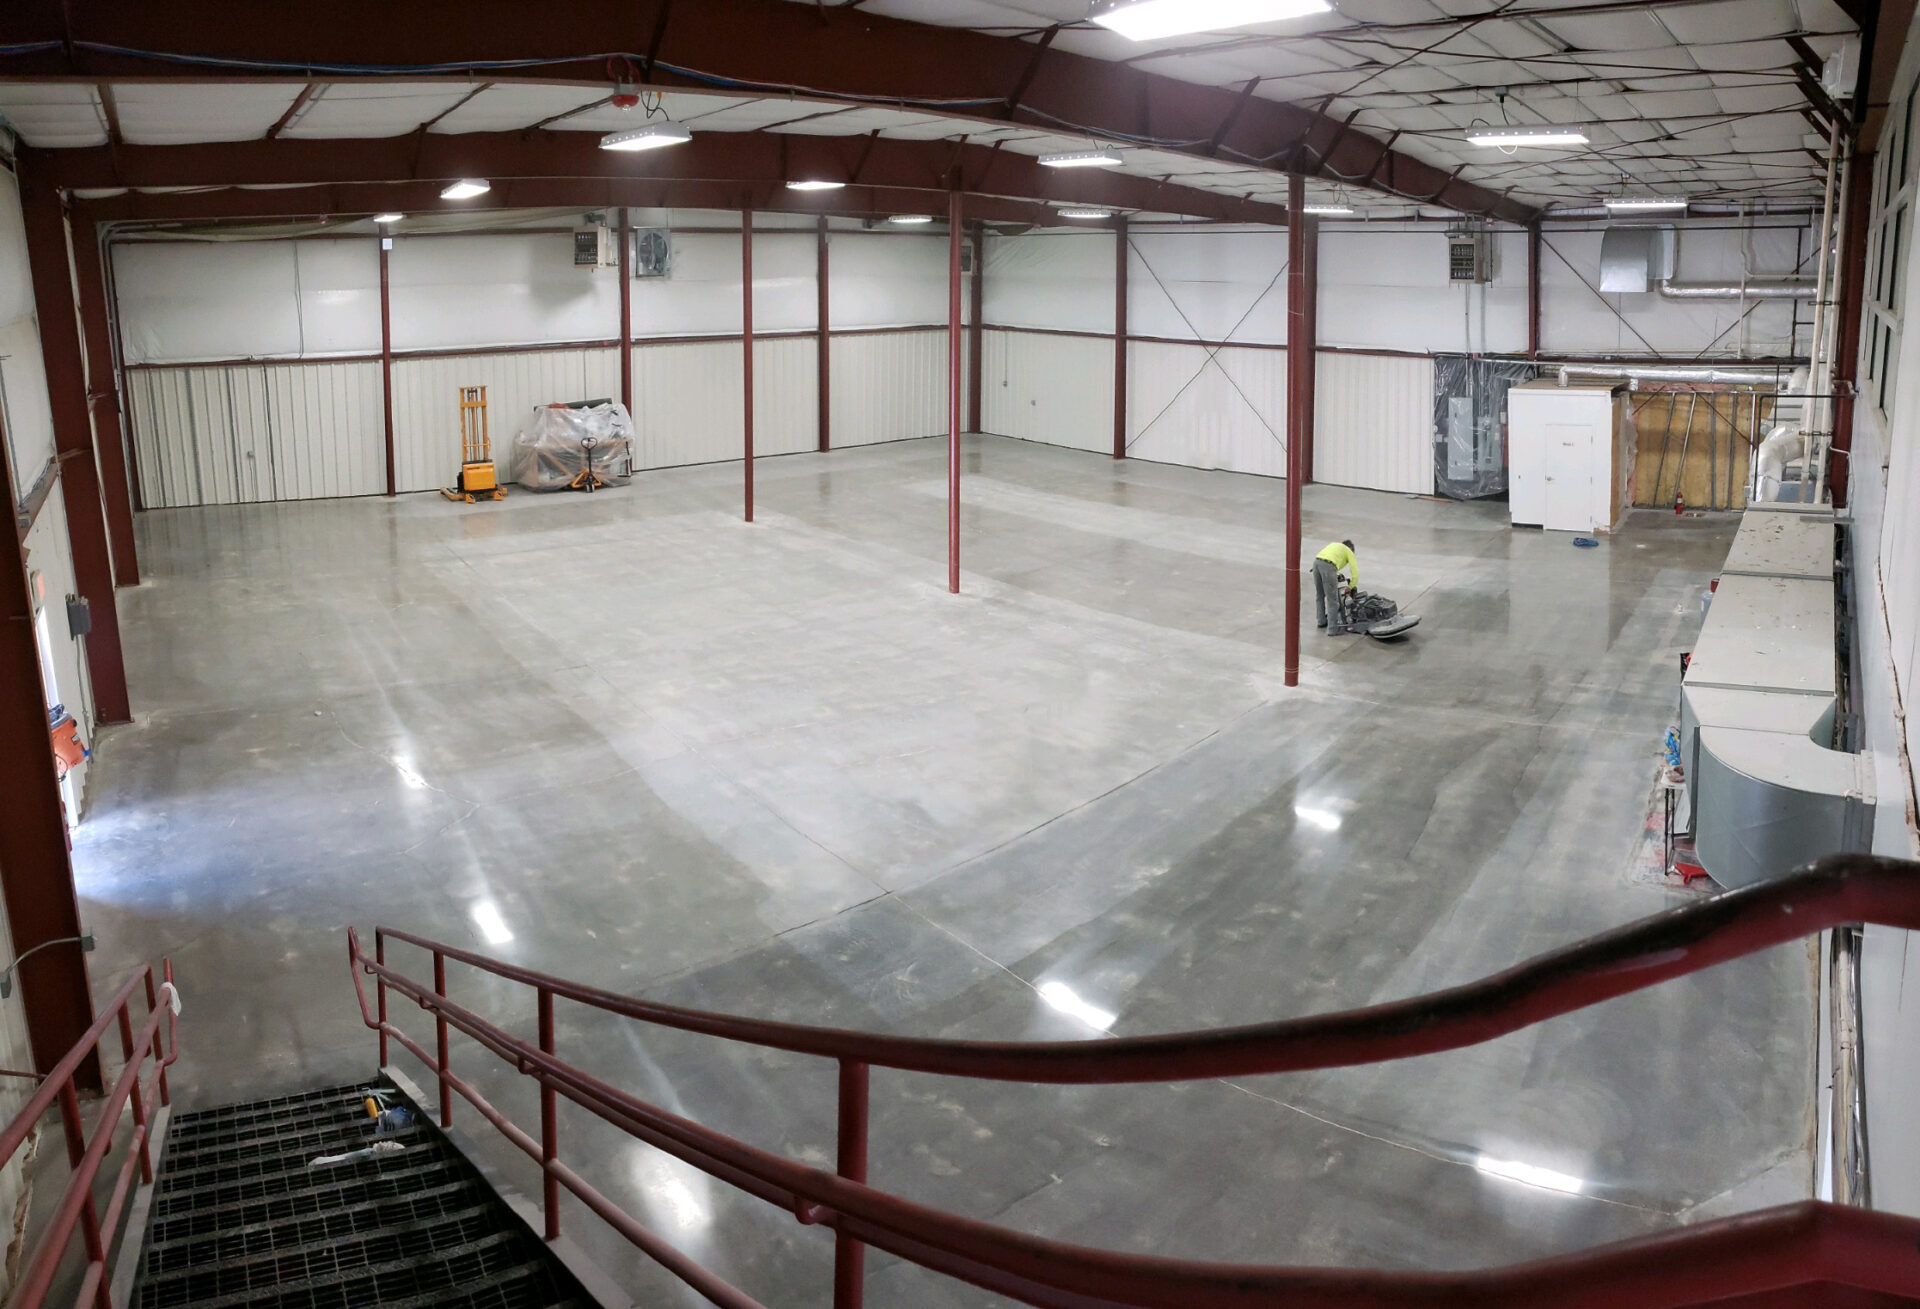 Storage units in Manchester, VT. The entire slab was ground, honed, densified, and polished to 400 grit finish. The owner asked for the aisles to be shiny and more reflective. The aisles between the individual storage units were guarded and burnished to 800 grit